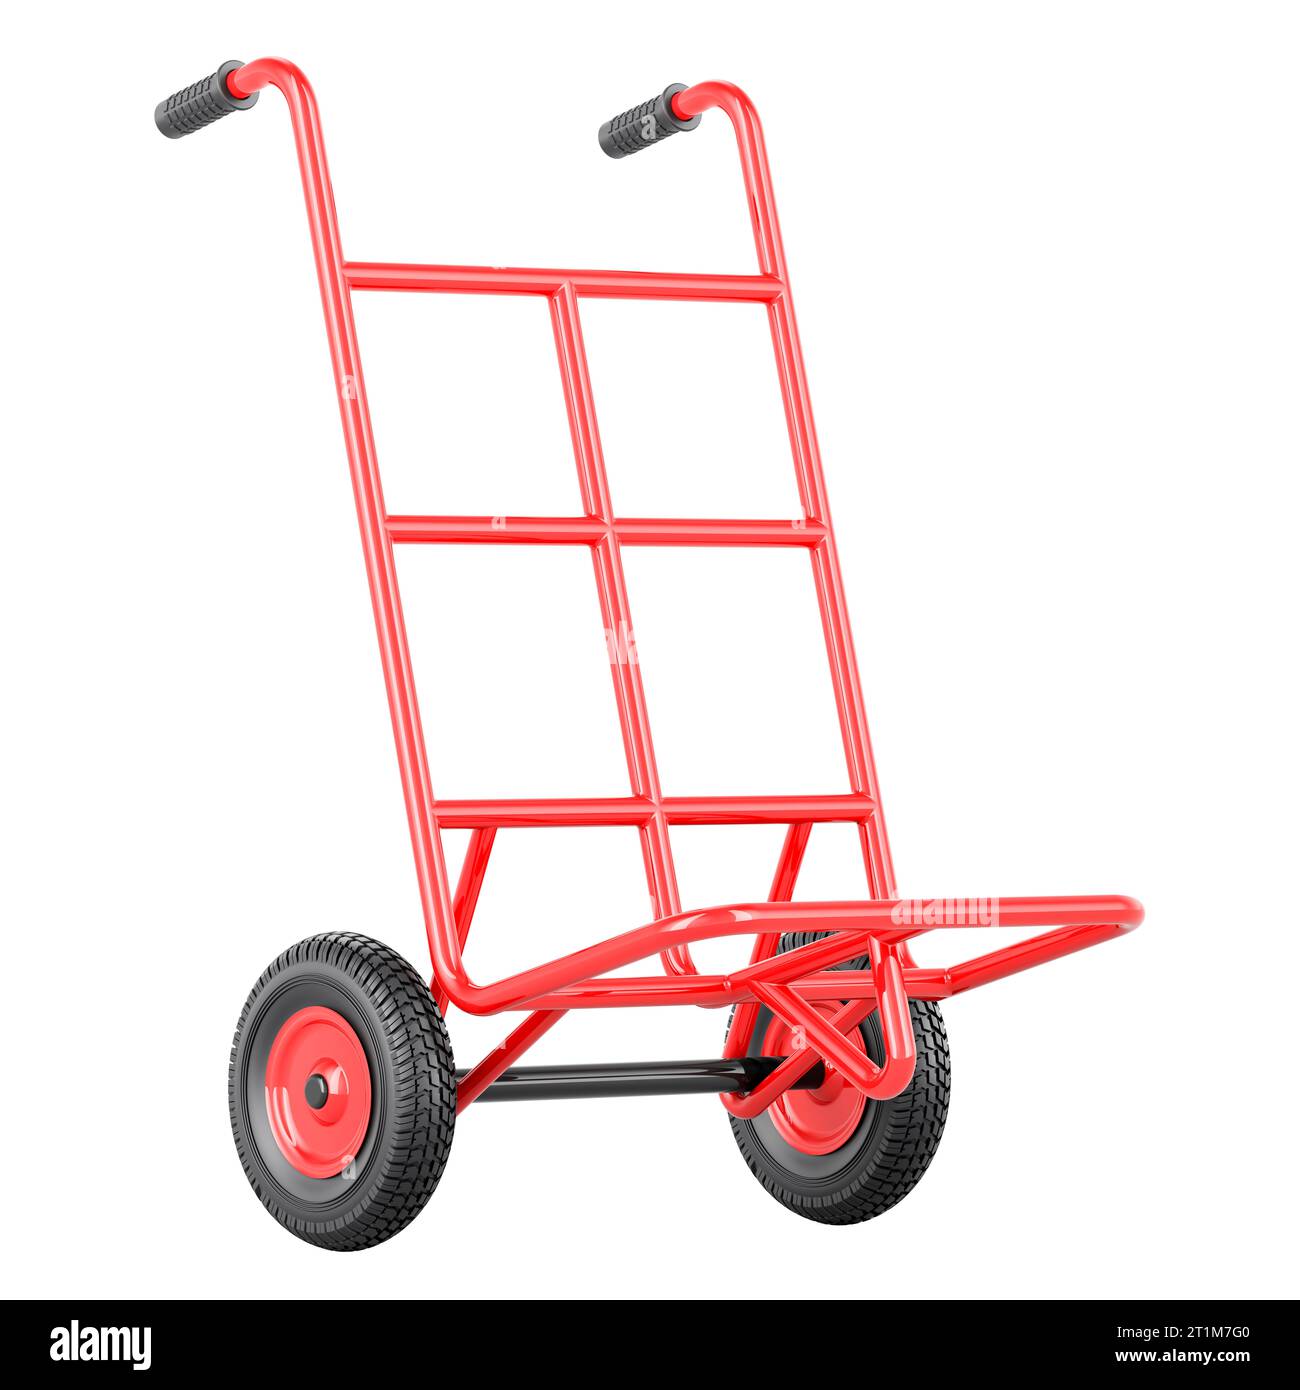 Empty Hand Truck, 3D rendering isolated on white background Stock Photo